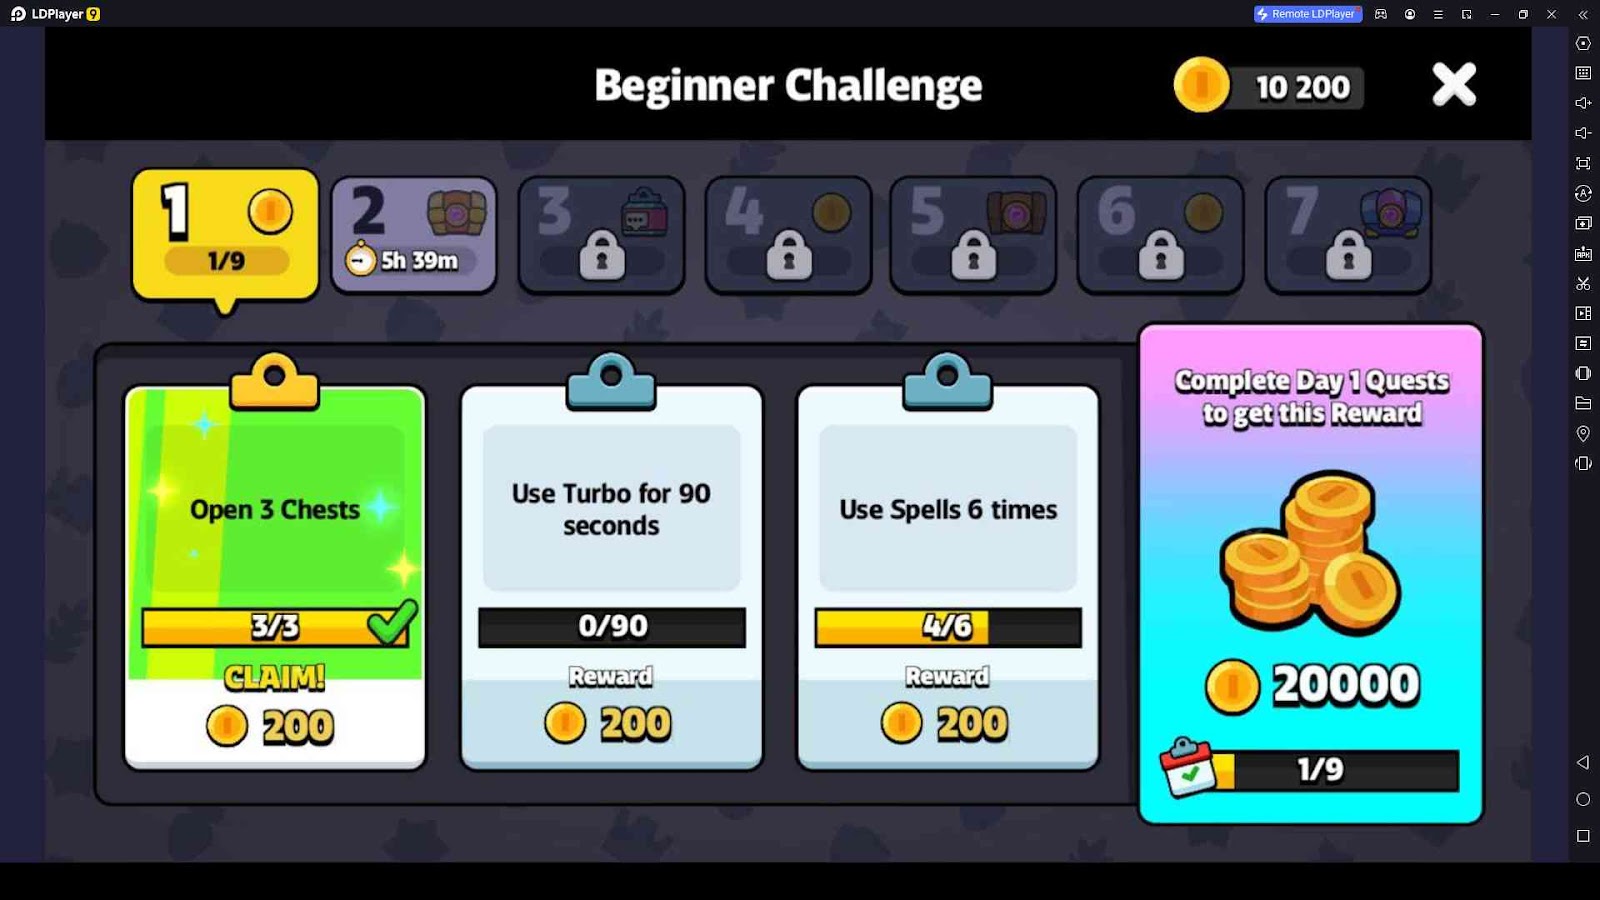 Complete the Beginner Challenges